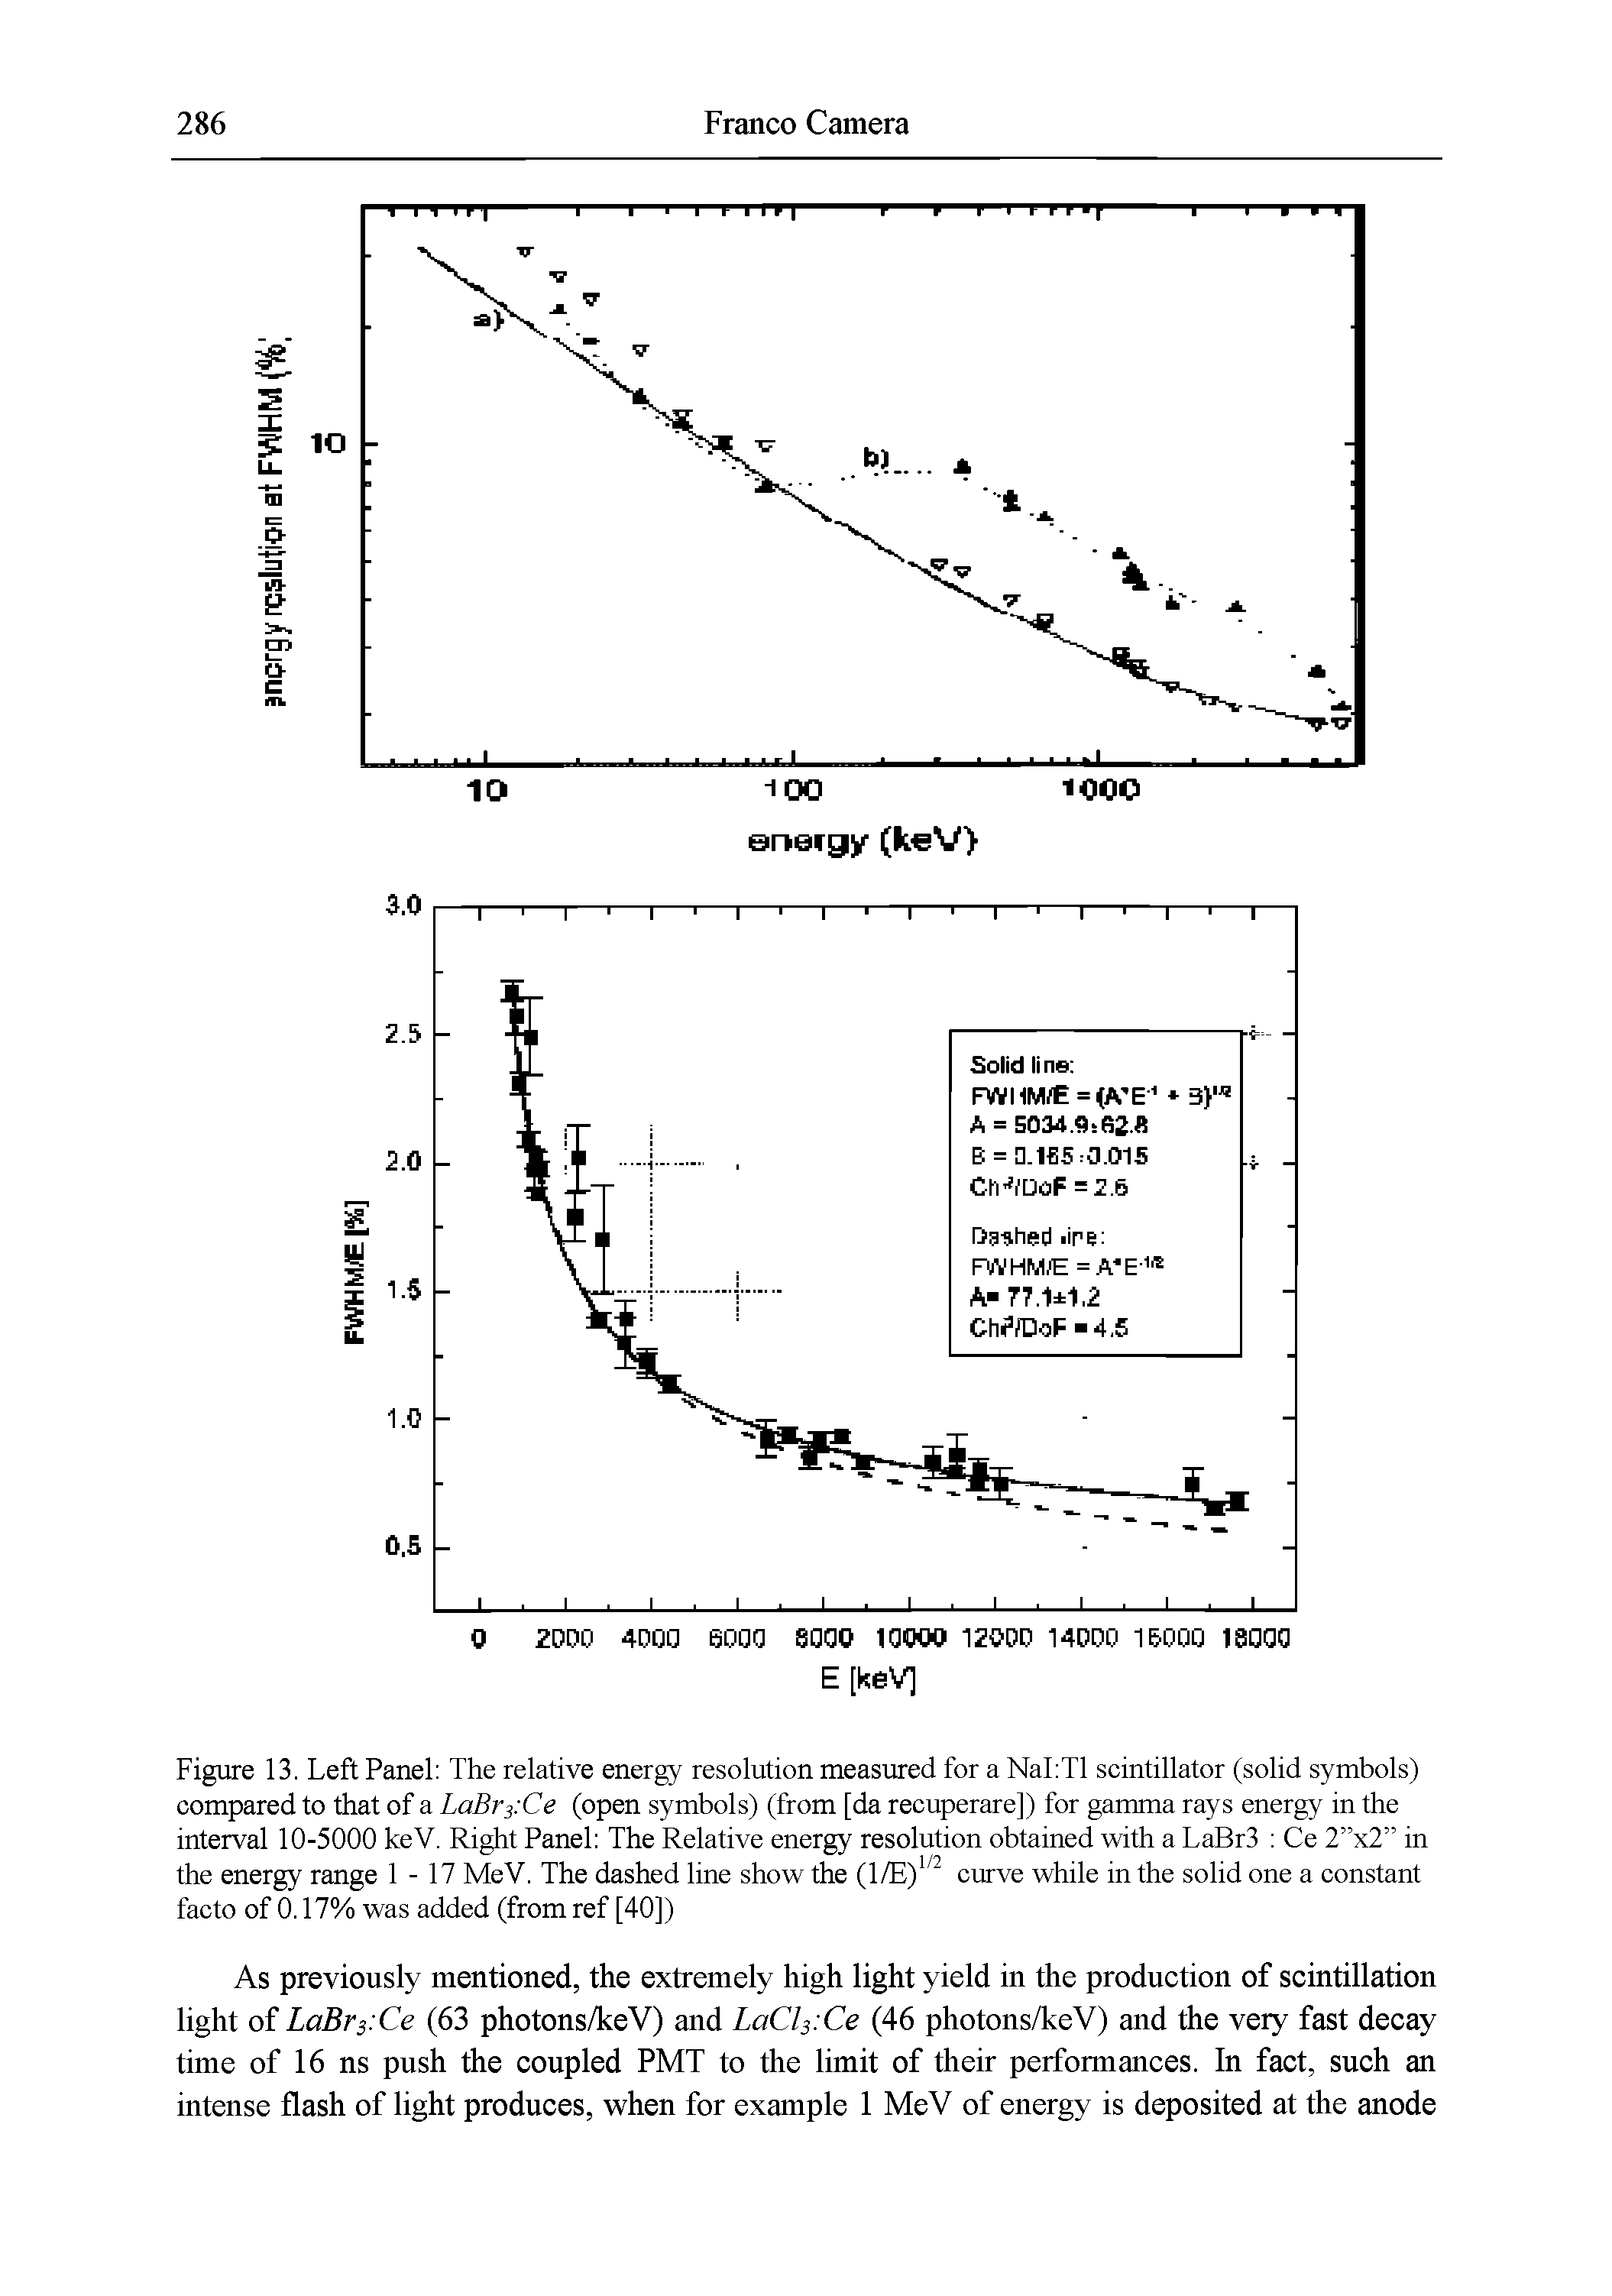 Figure 13. Left Panel The relative energy resolution measured for a NaLTl scintillator (solid symbols) compared to that of a LaBr3. Ce (open symbols) (from [da recuperare]) for gamma rays energy in the interval 10-5000 keV. Right Panel The Relative energy resolution obtained with a LaBr3 Ce 2 x2 in the energy range 1 -17 MeV. The dashed line show the (1/E) curve while in the solid one a constant facto of 0.17% was added (from ref [40])...